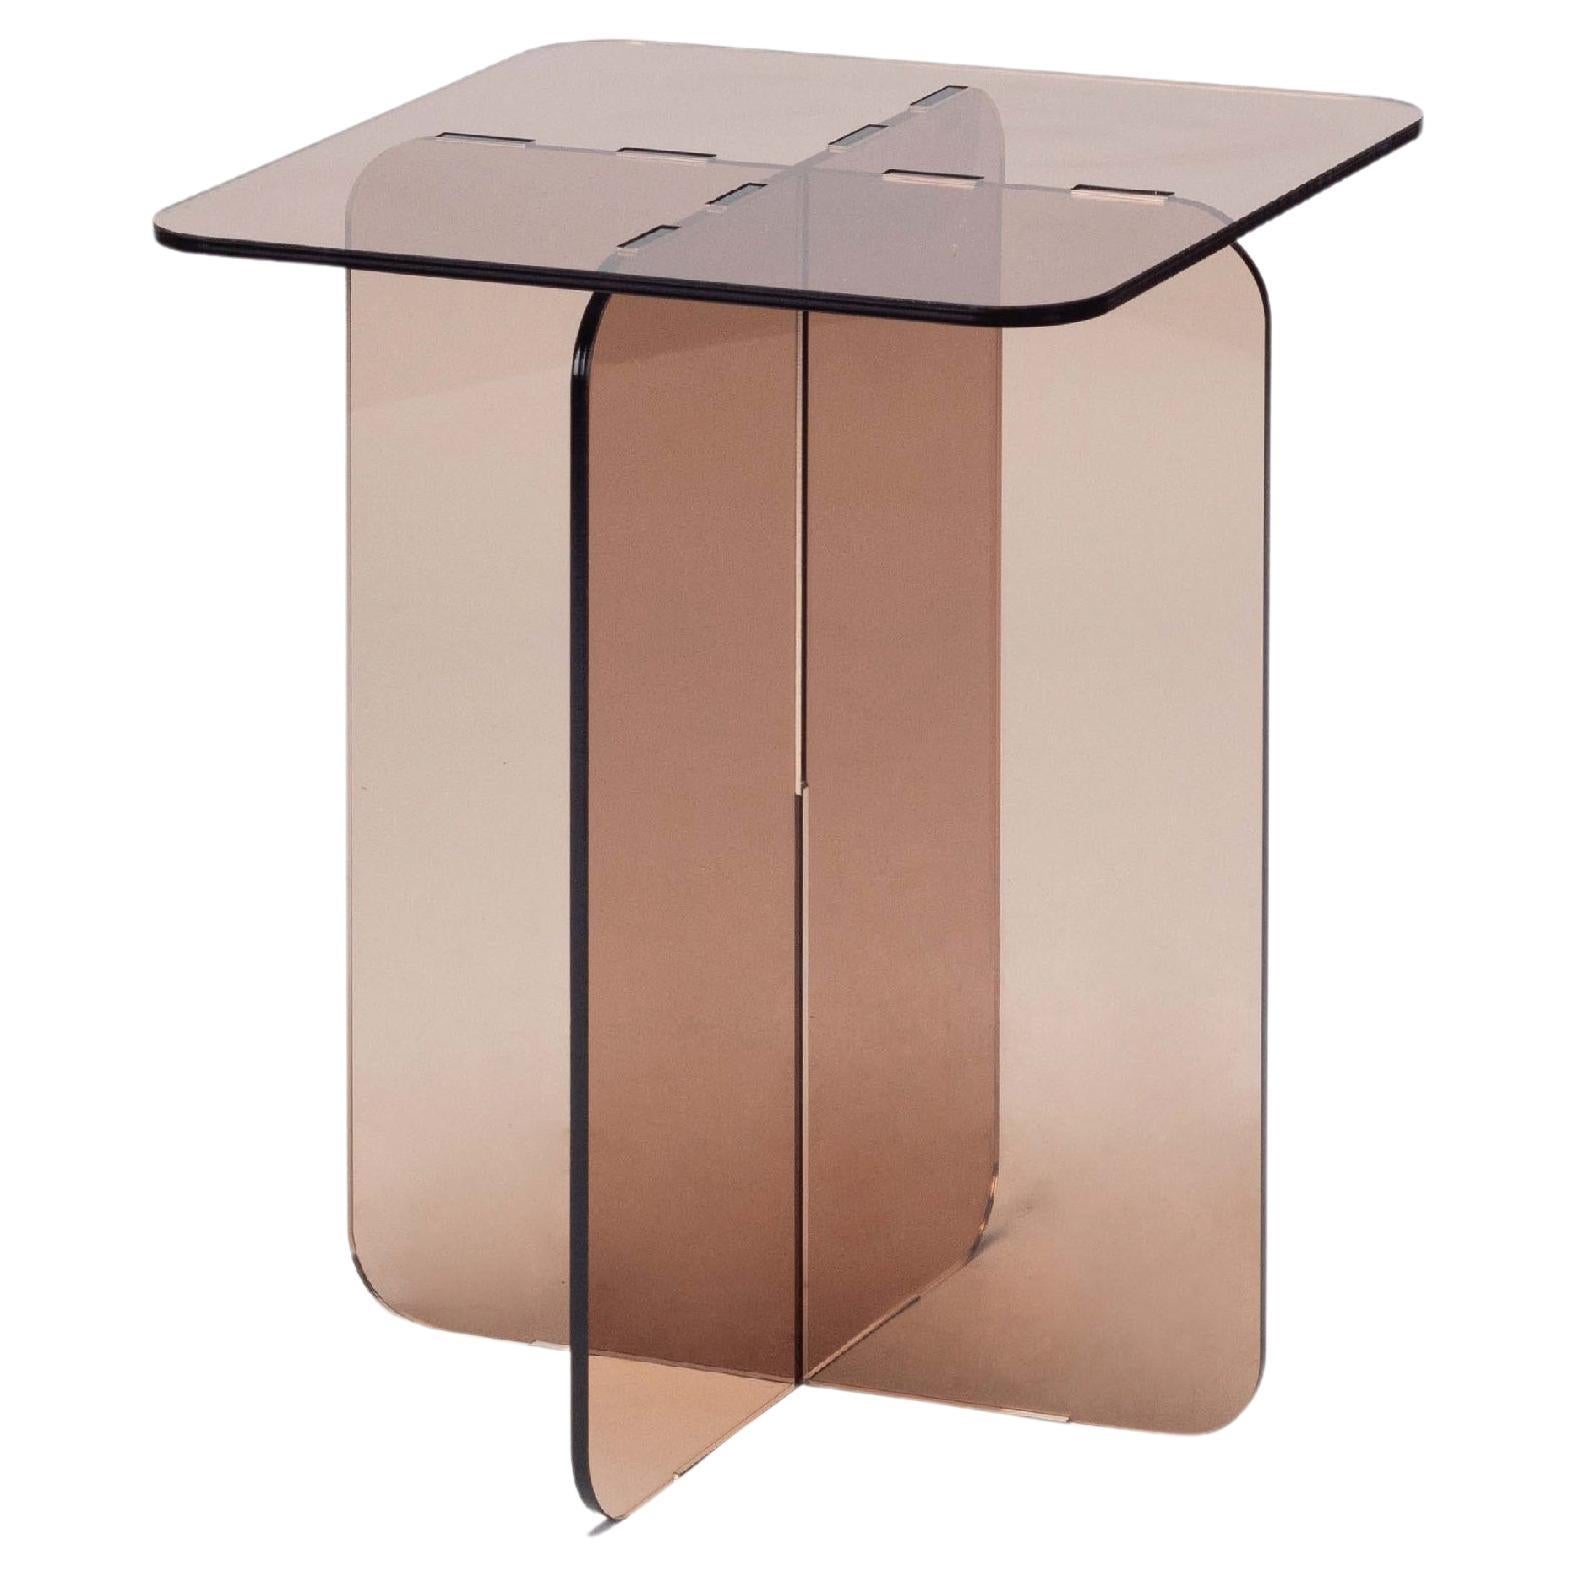 ROMA Contemporary Side Table Acrylic by Ries (Square Top)